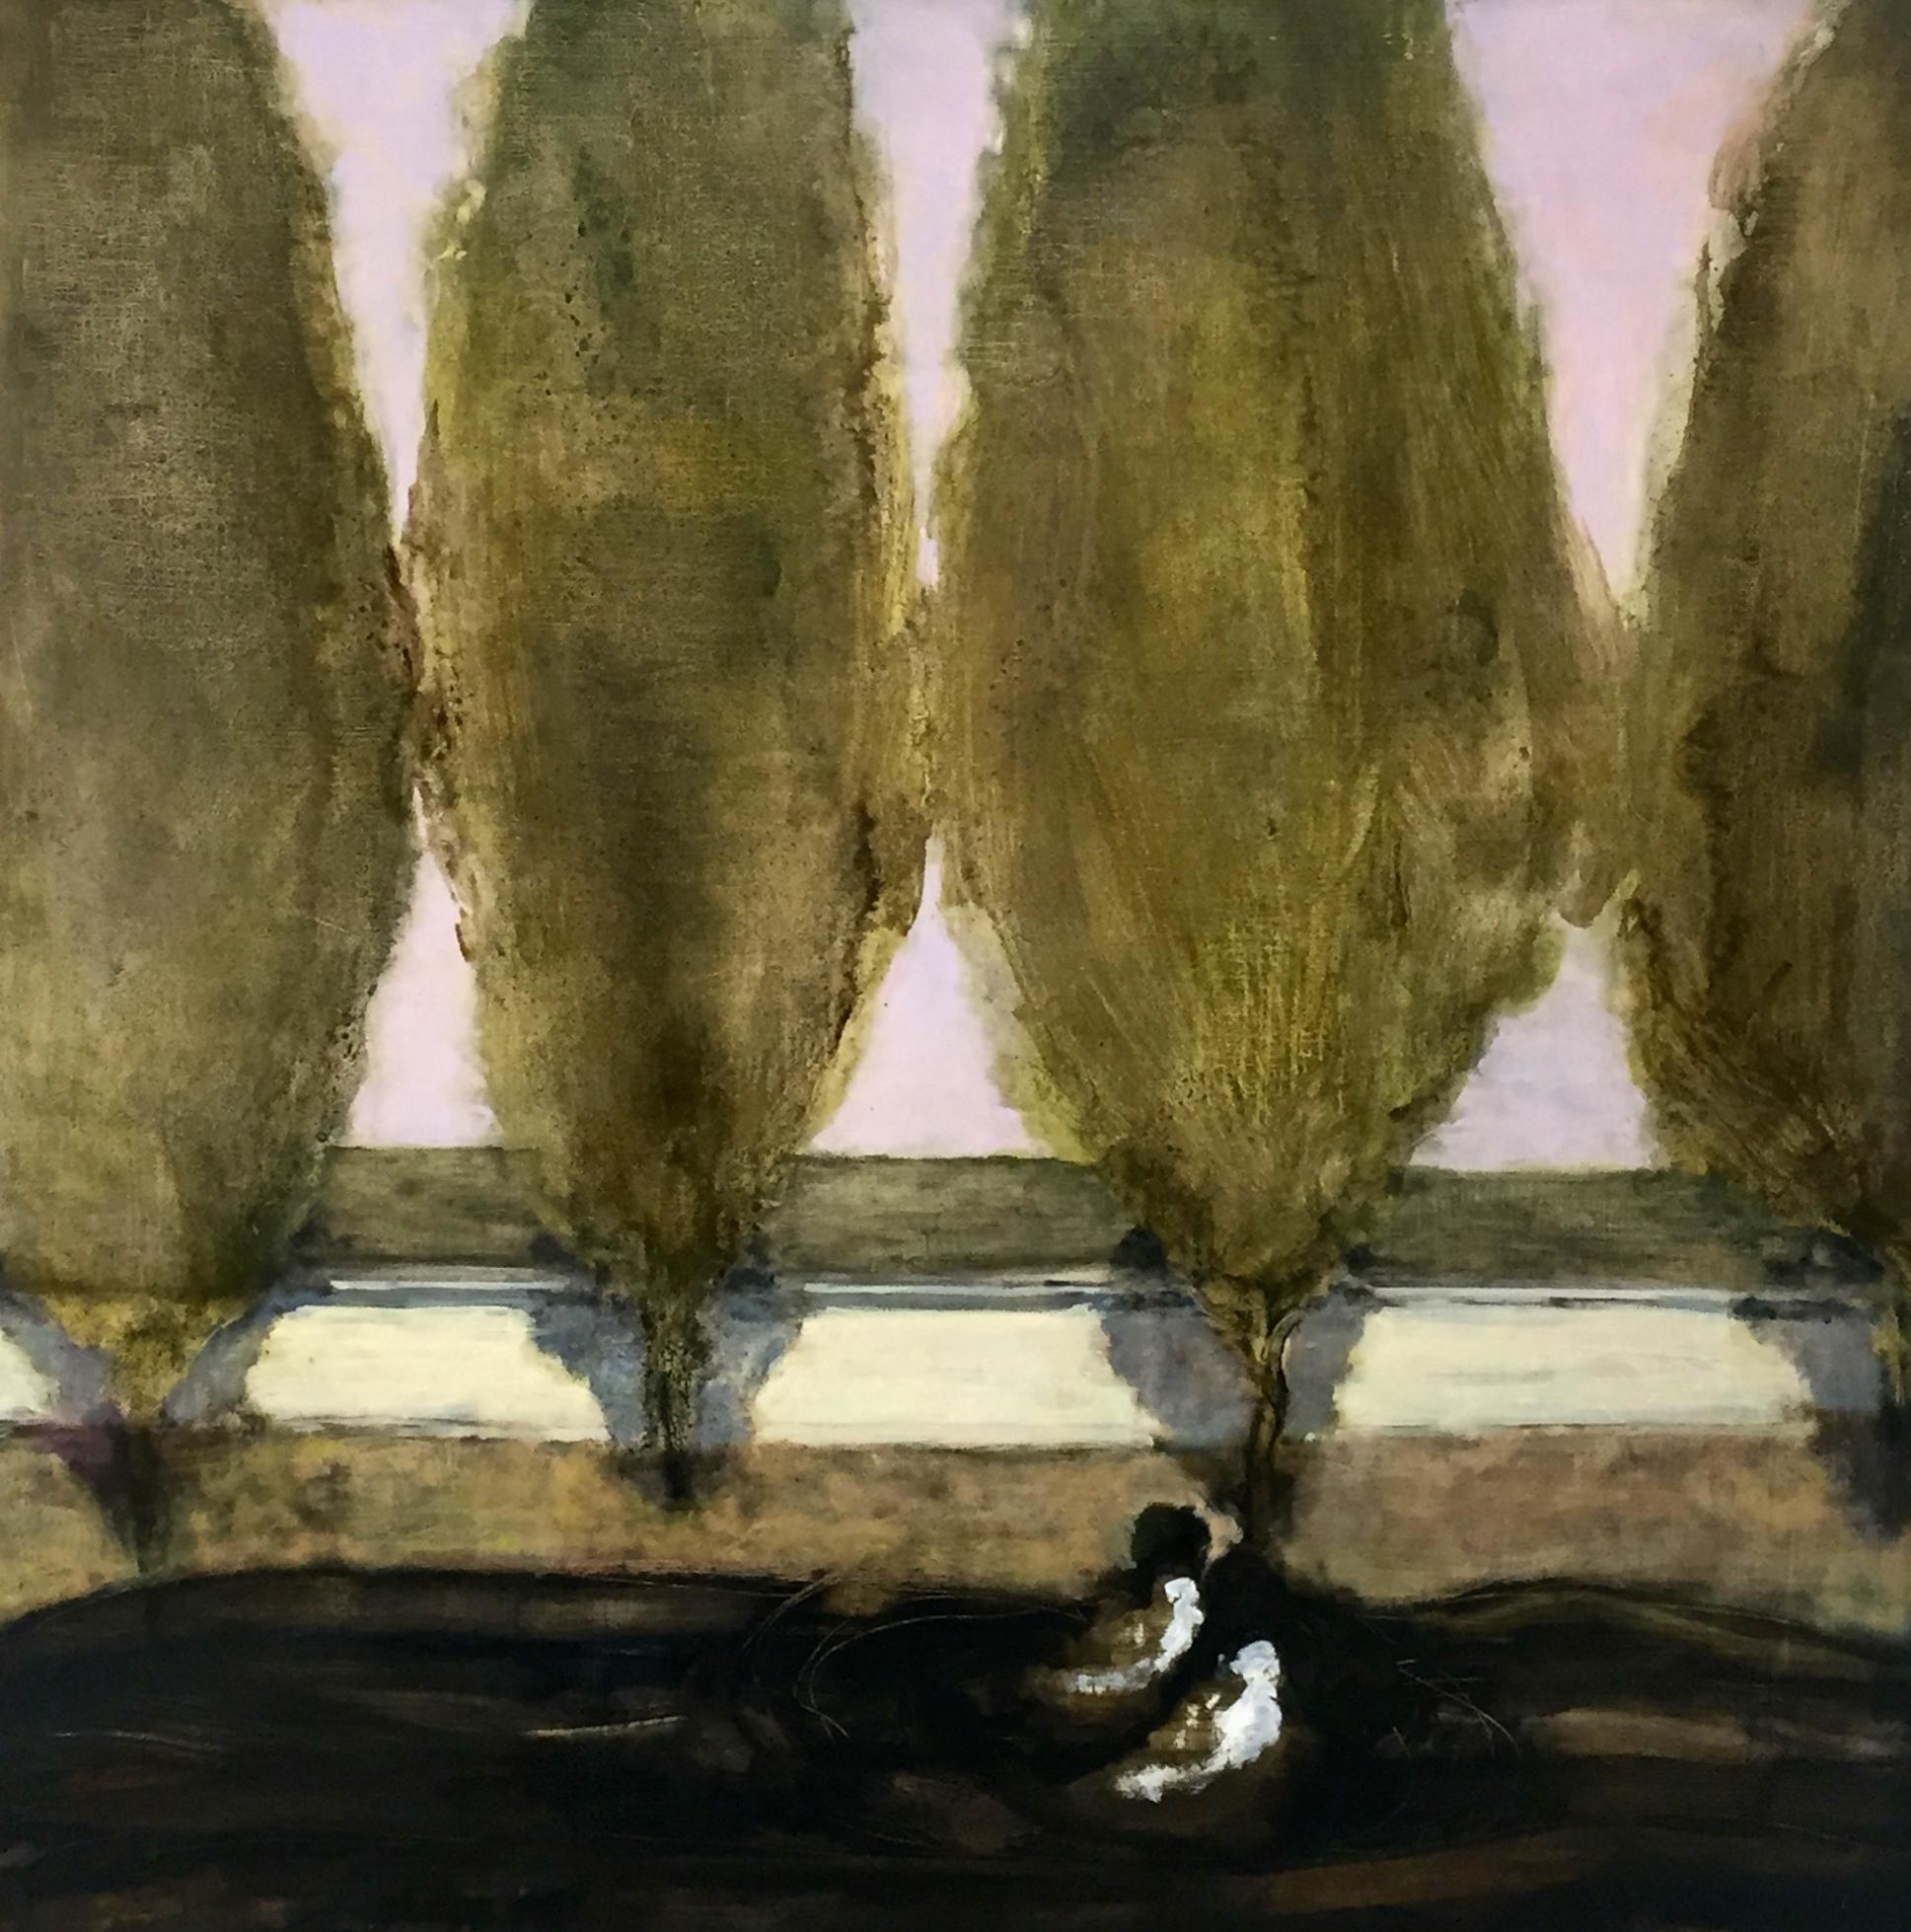 David Konigsberg Figurative Painting - Tooling, Square Landscape Painting of Two Figures in Car with Row of Green Trees